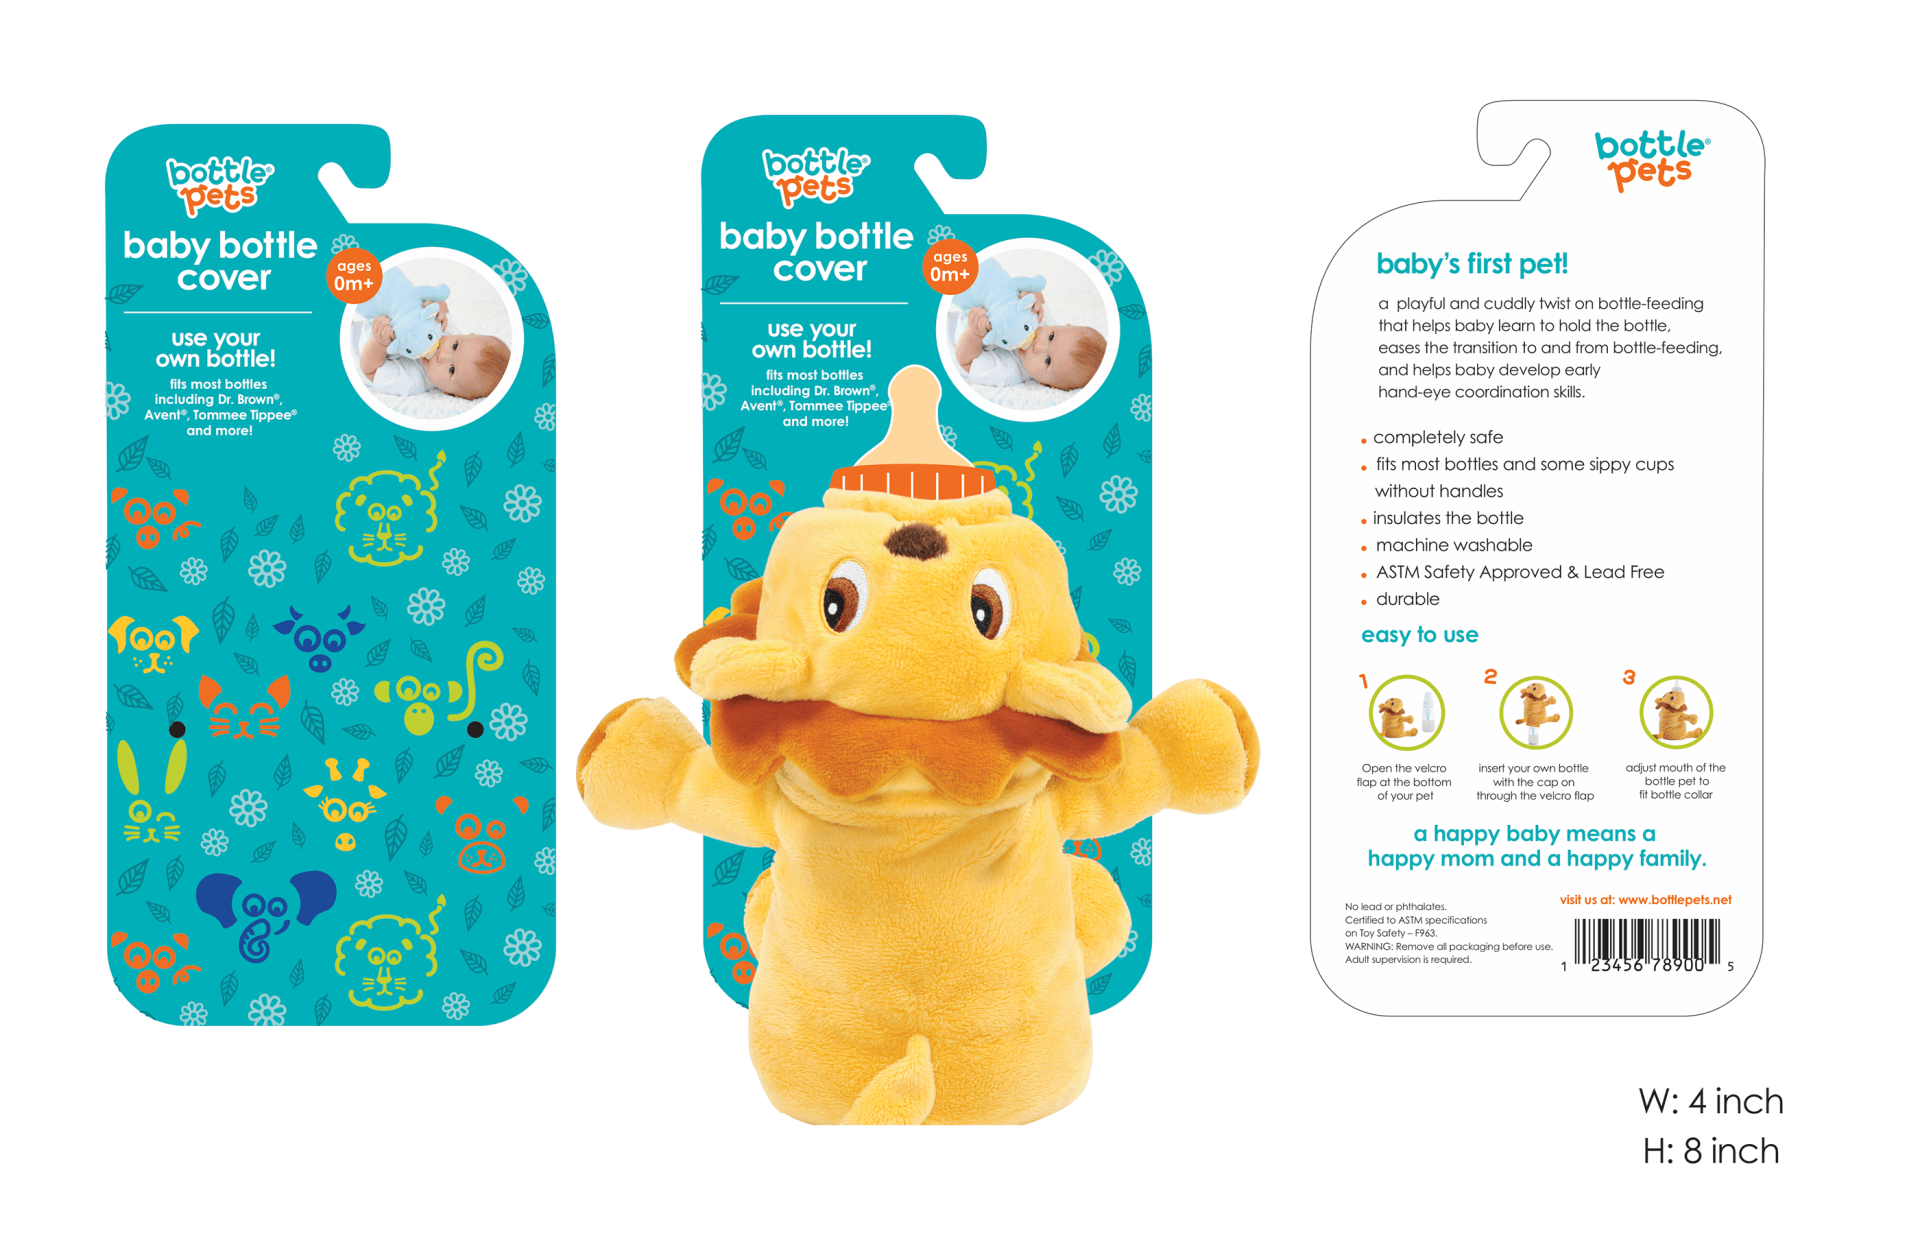 A mockup showing the Bottle Pets package design with the product attached.